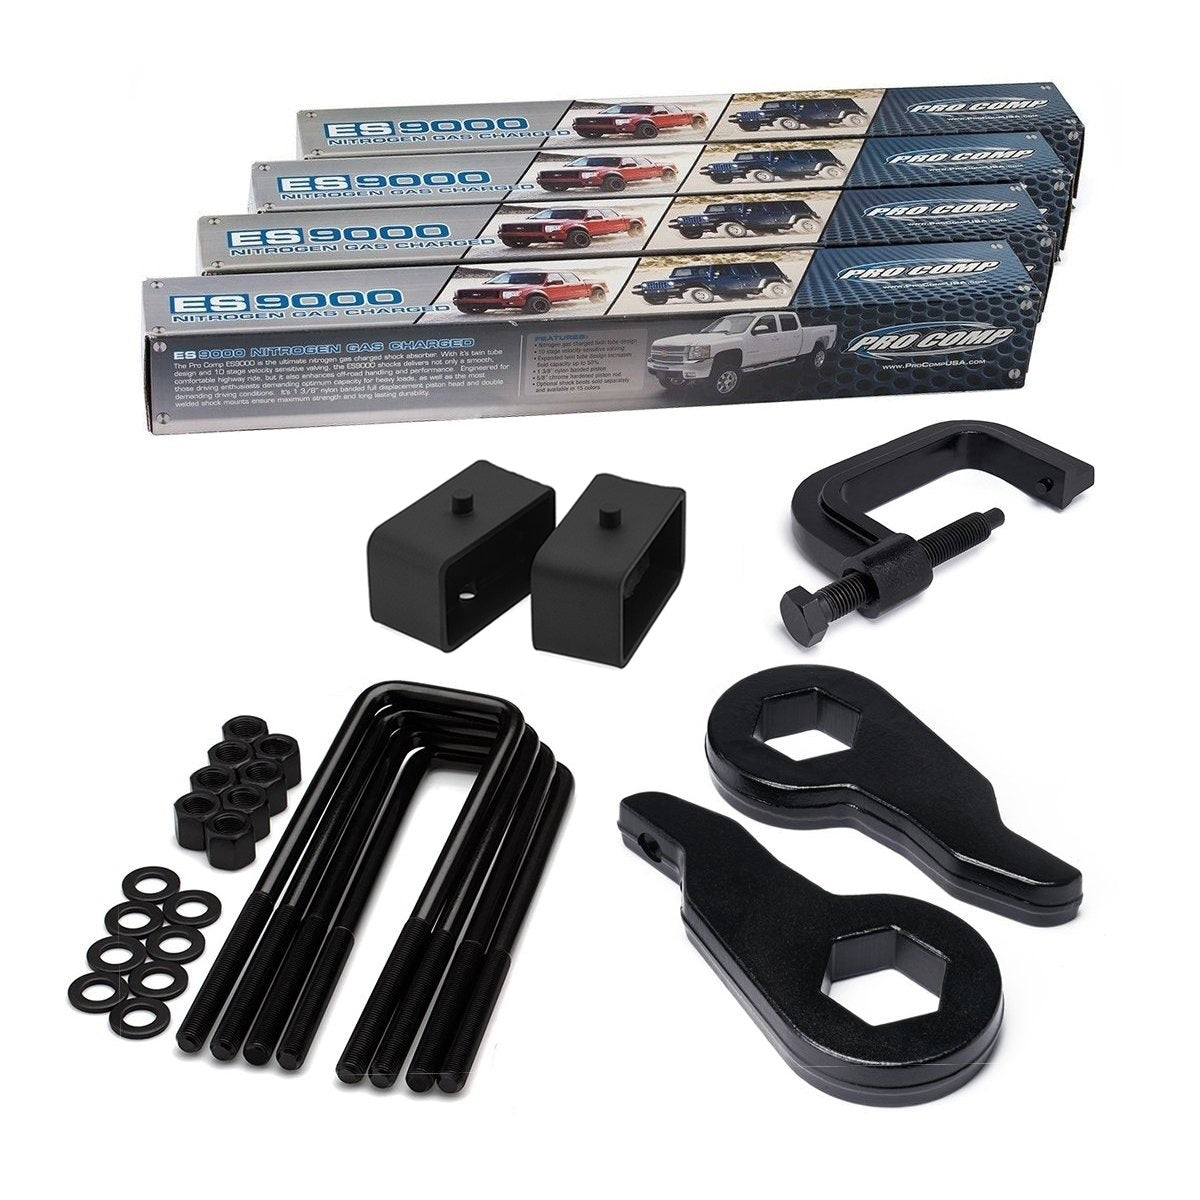 2001-2007 Chevy Silverado 1500 HD Full Lift Kit with Extended Shocks and Torsion Key Unloading/Removal Tool